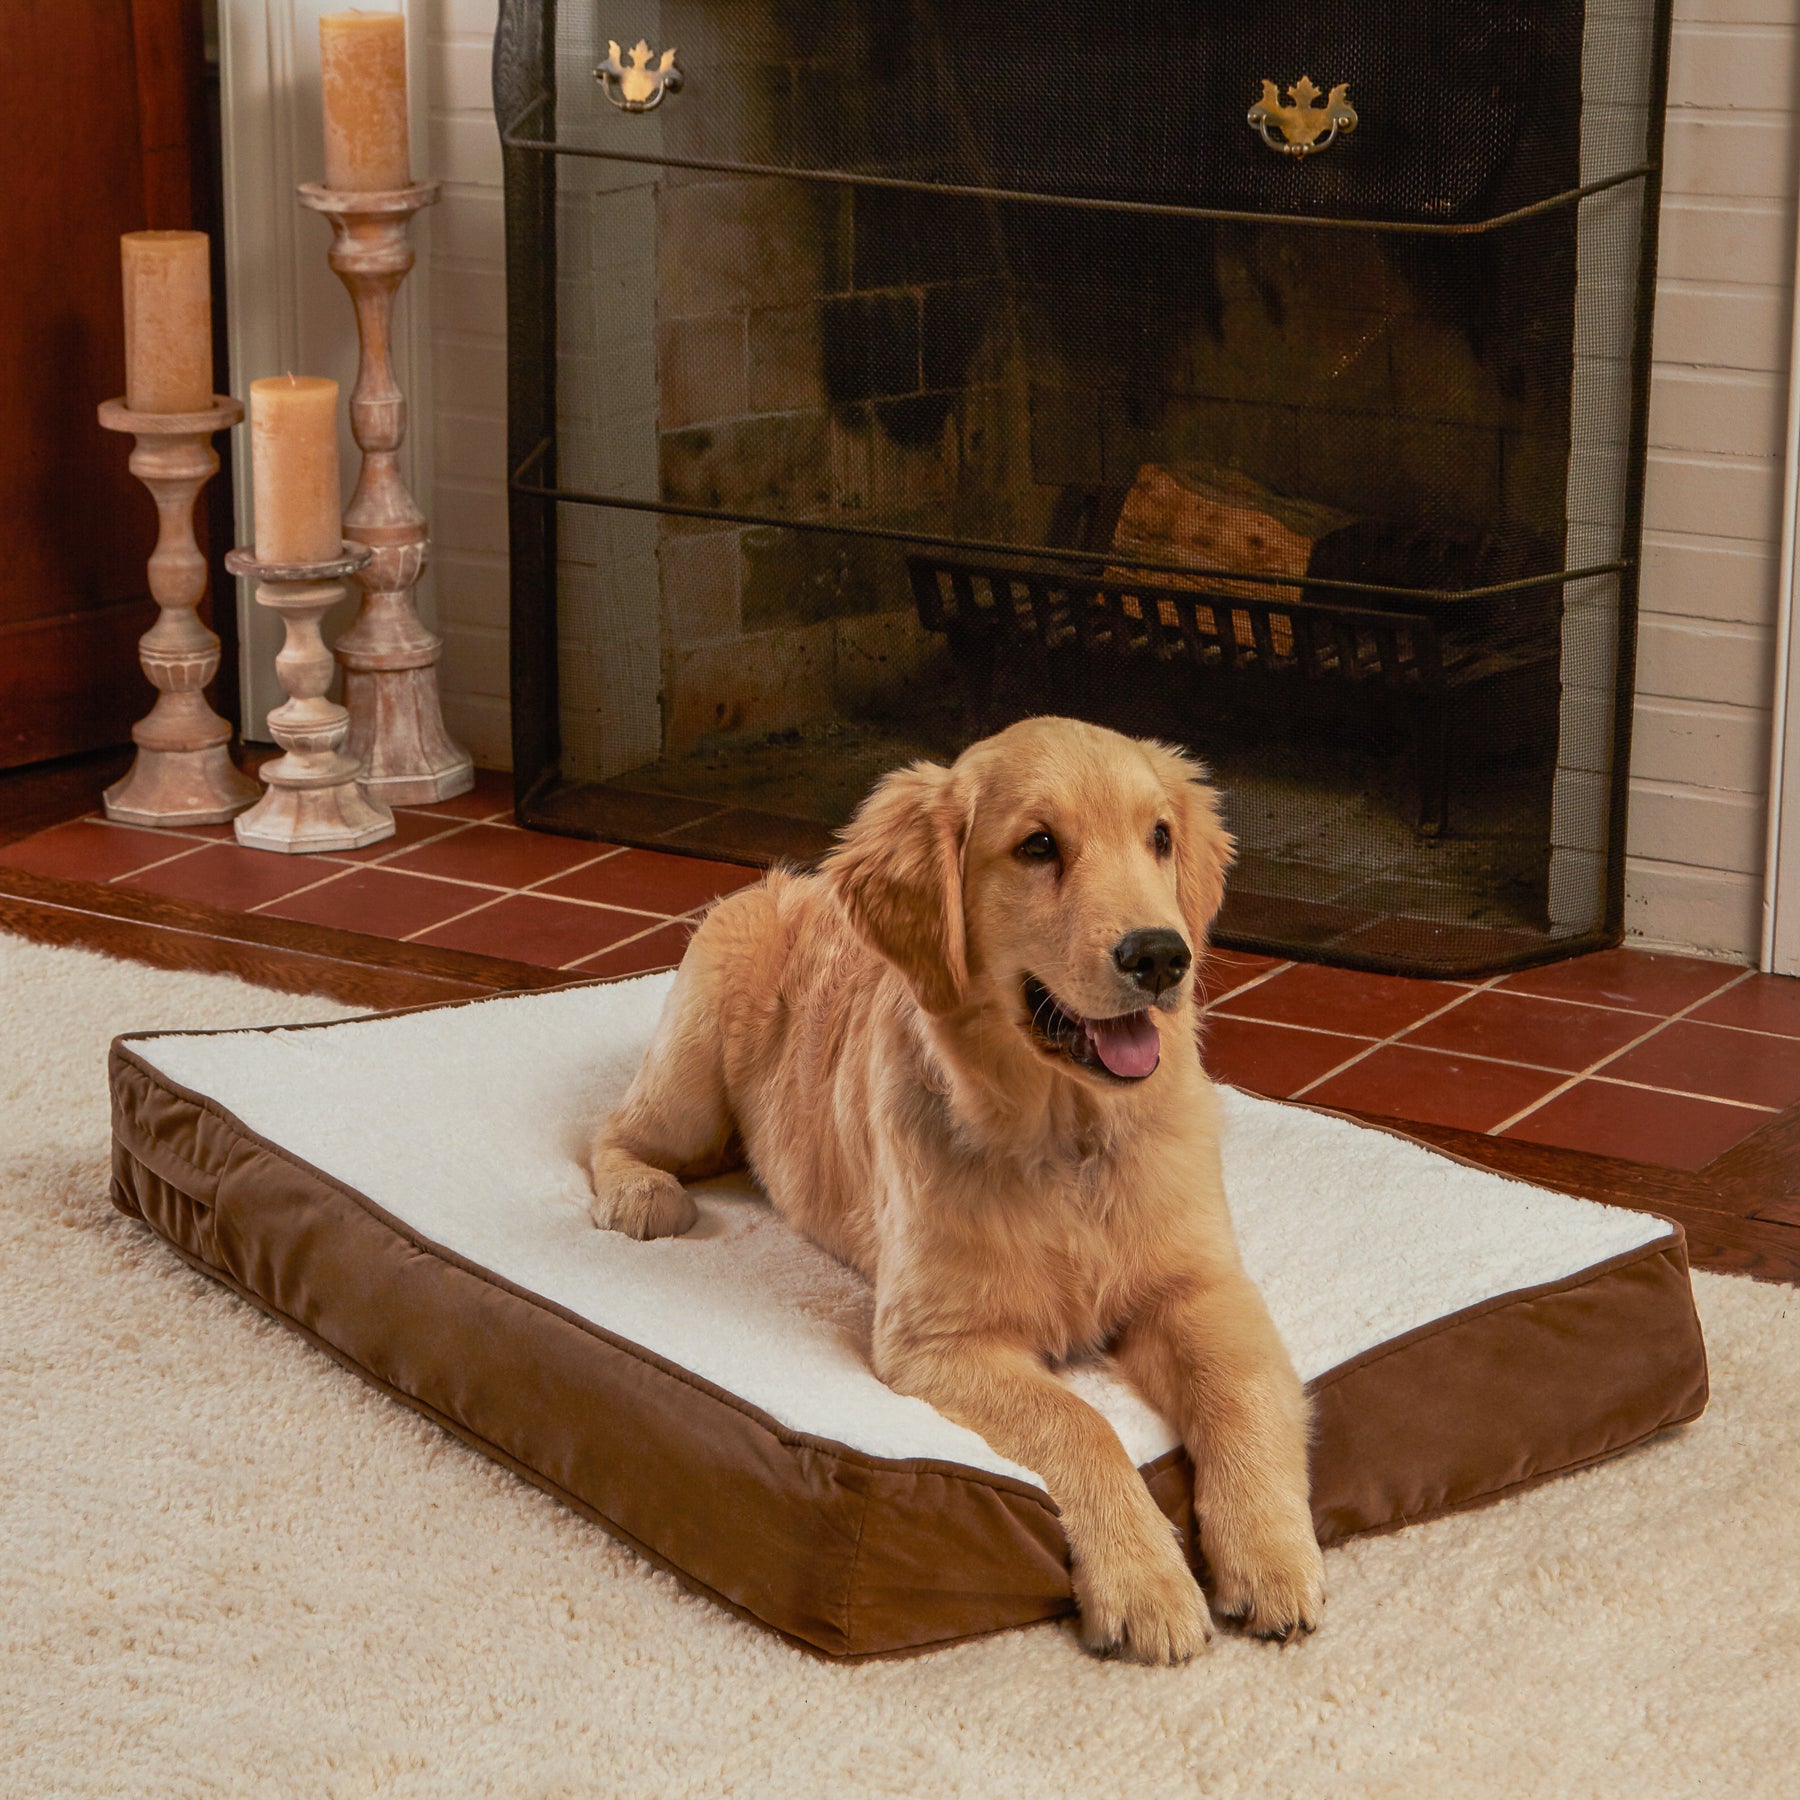 Happy Hounds Oscar Sherpa Orthopedic Dog Bed， Latte， Small (36 x 24 in.)